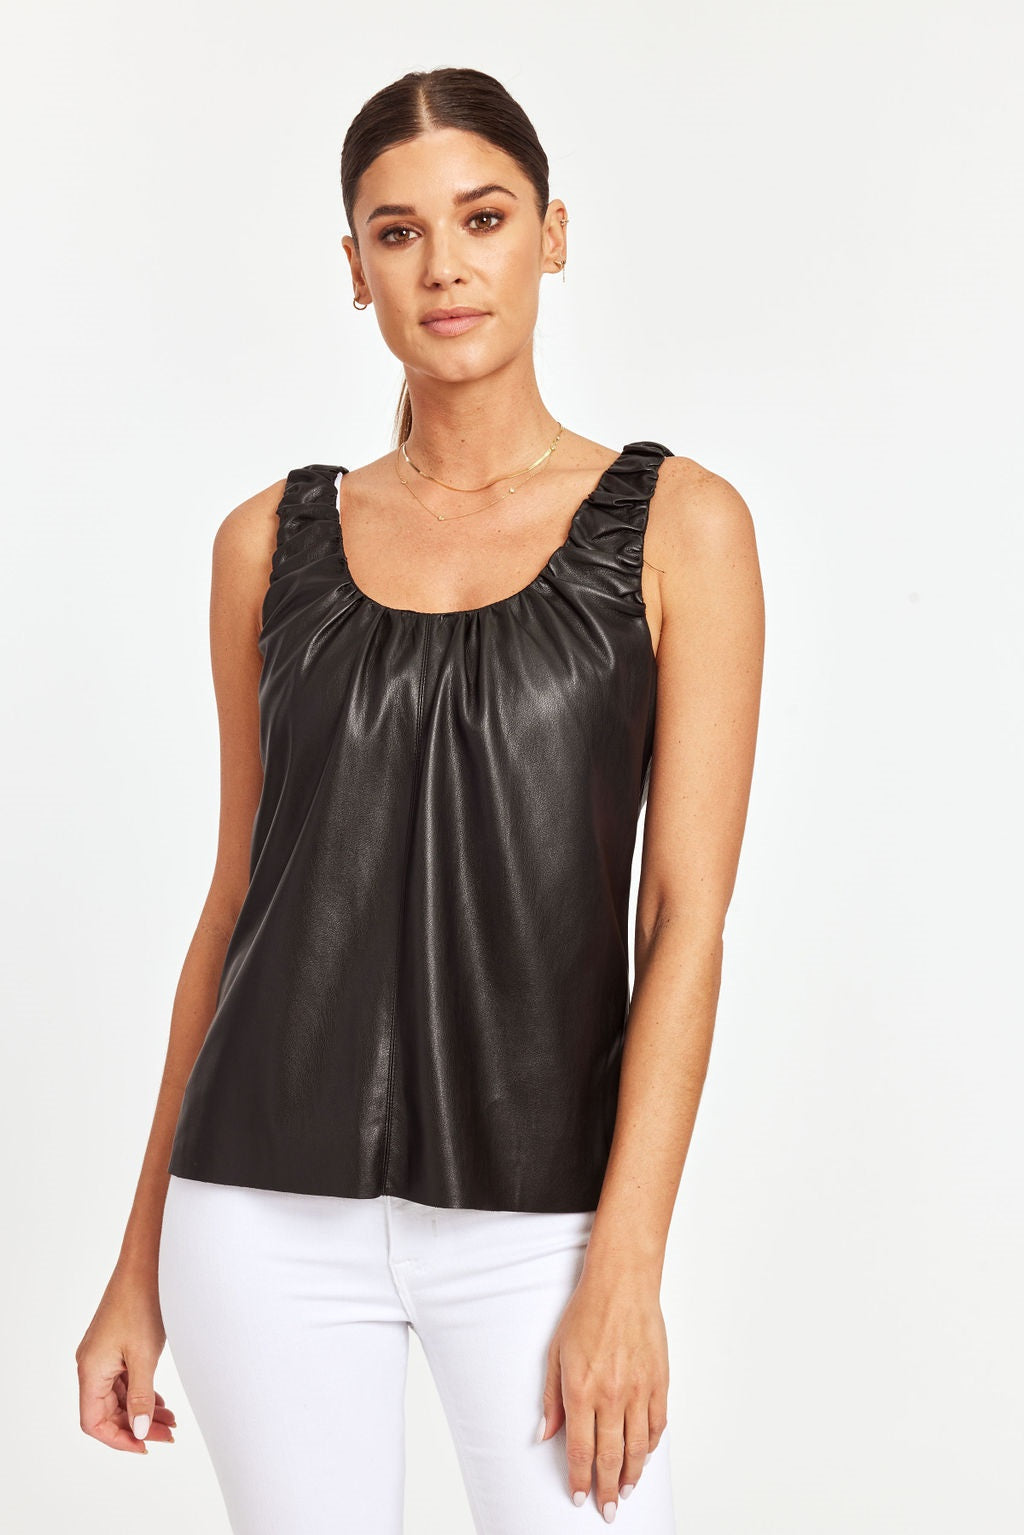 Know One Cares Cropped Faux Leather Tank Top - Women's Tank Tops